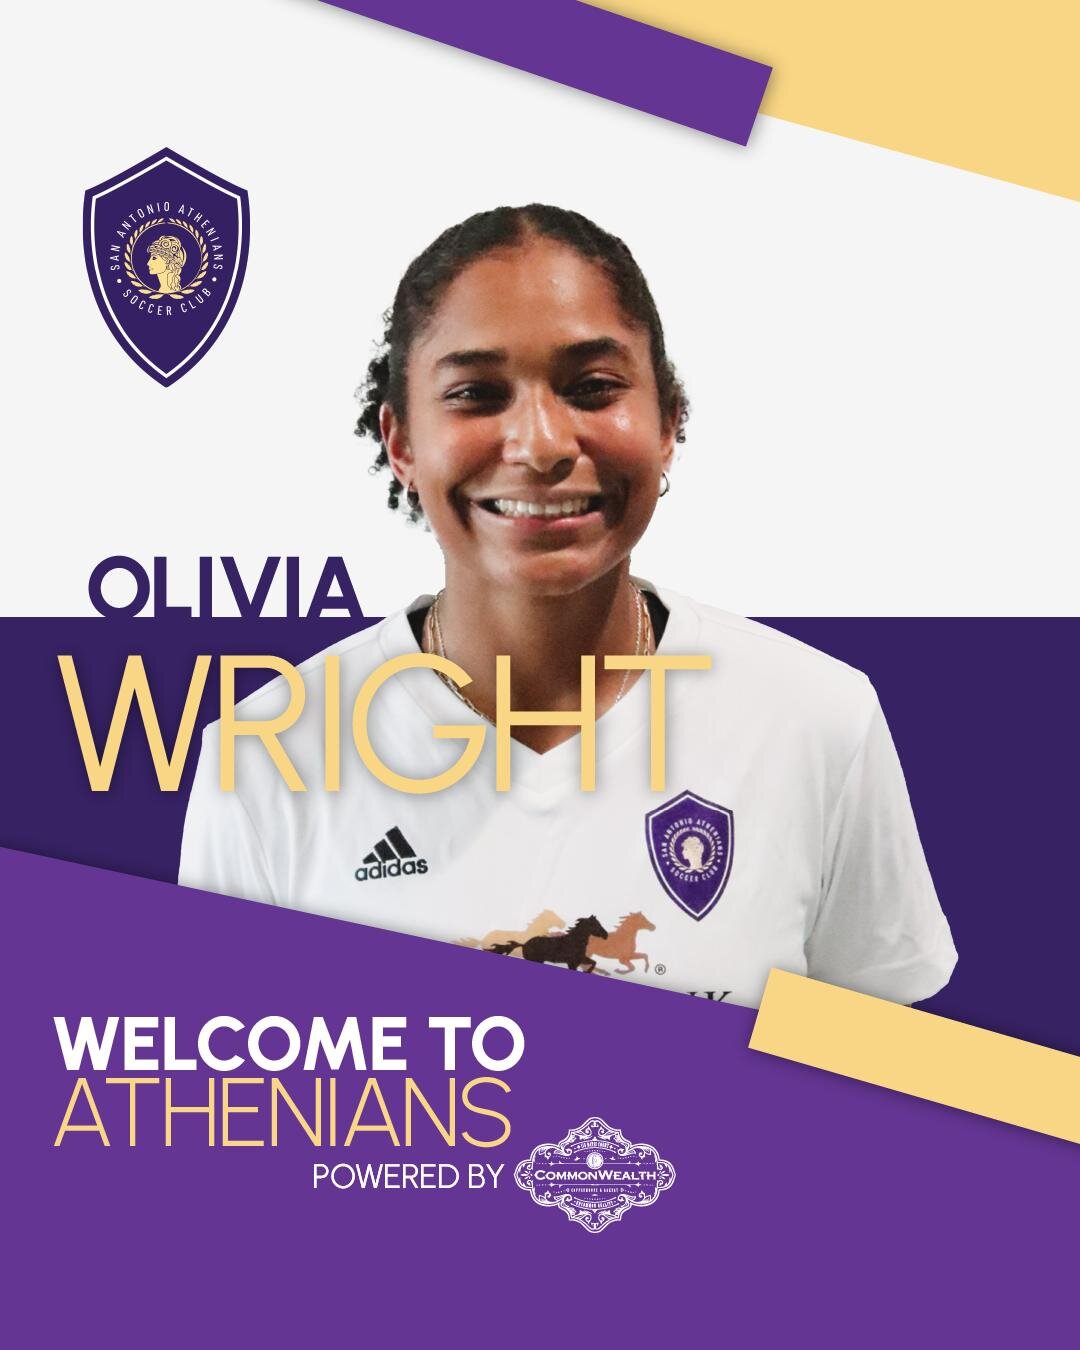 Please join us in giving a warm welcome to the San Antonio Athenians team &ndash; Olivia Wright and Madisson Herrera! 🎉 We are thrilled to have these talented athletes on board and can't wait for them to make their mark on the field this season. The